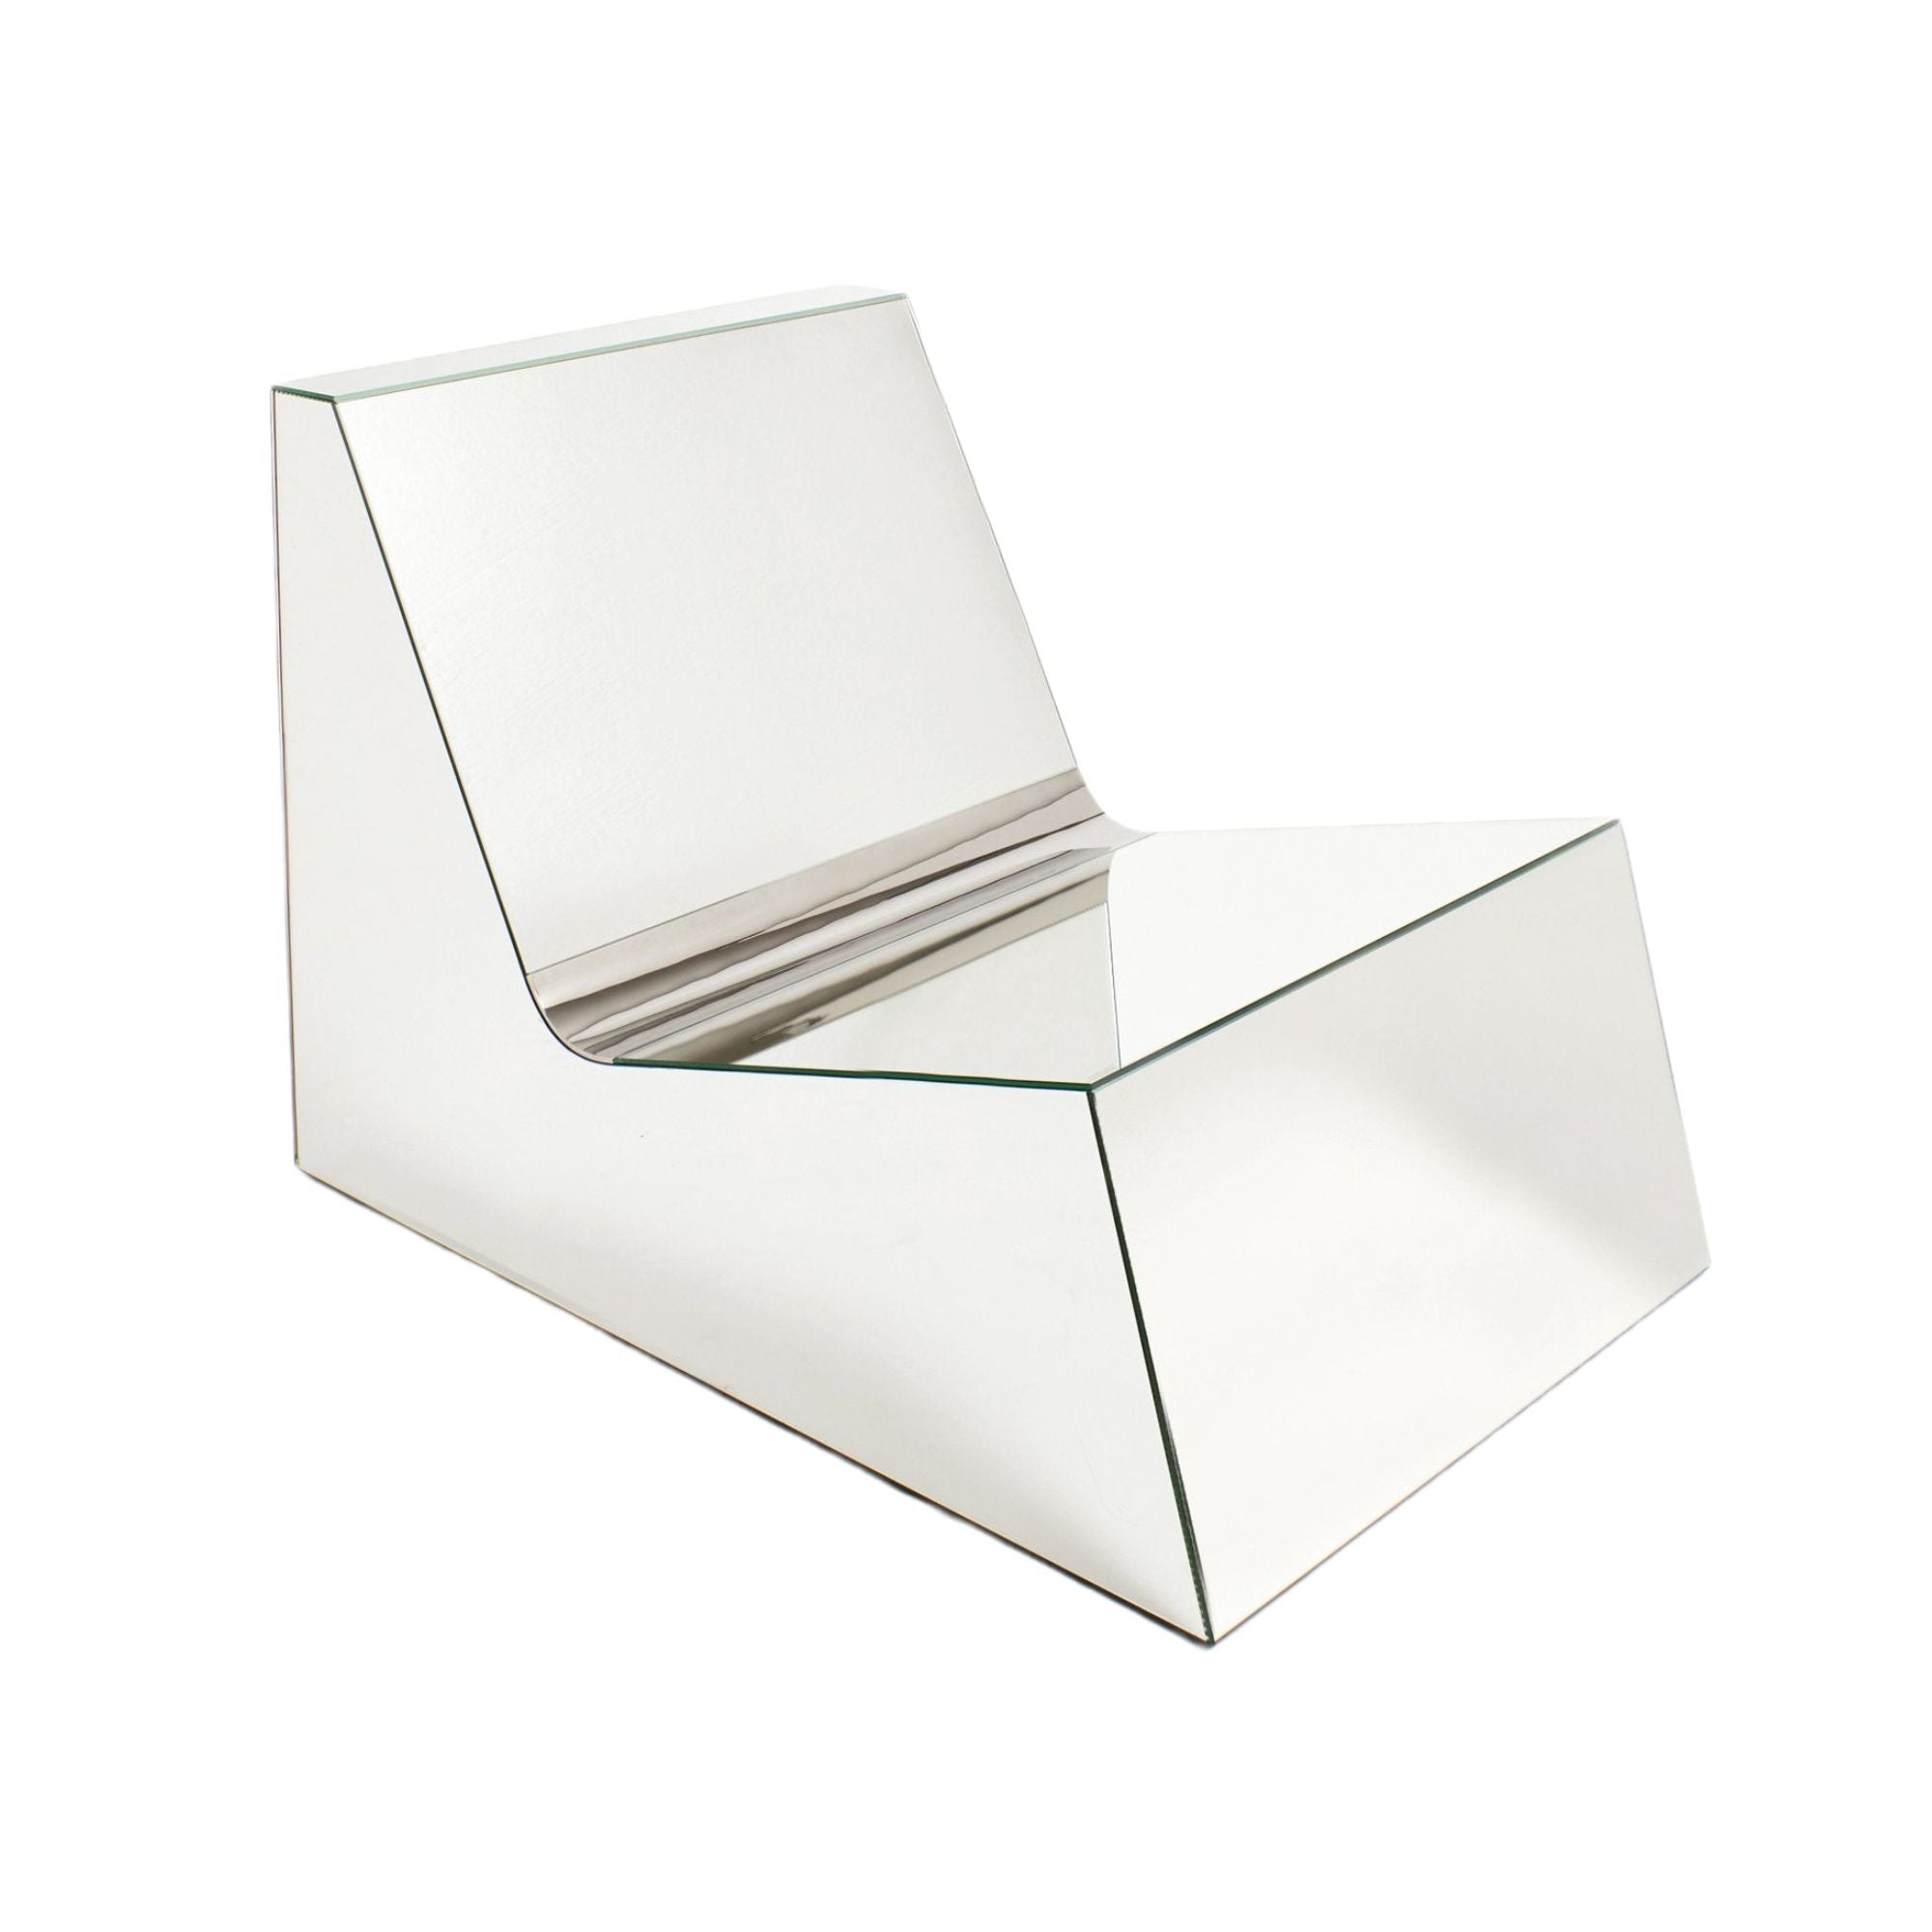 Mirror Lounge Chair Armchair Project 213A